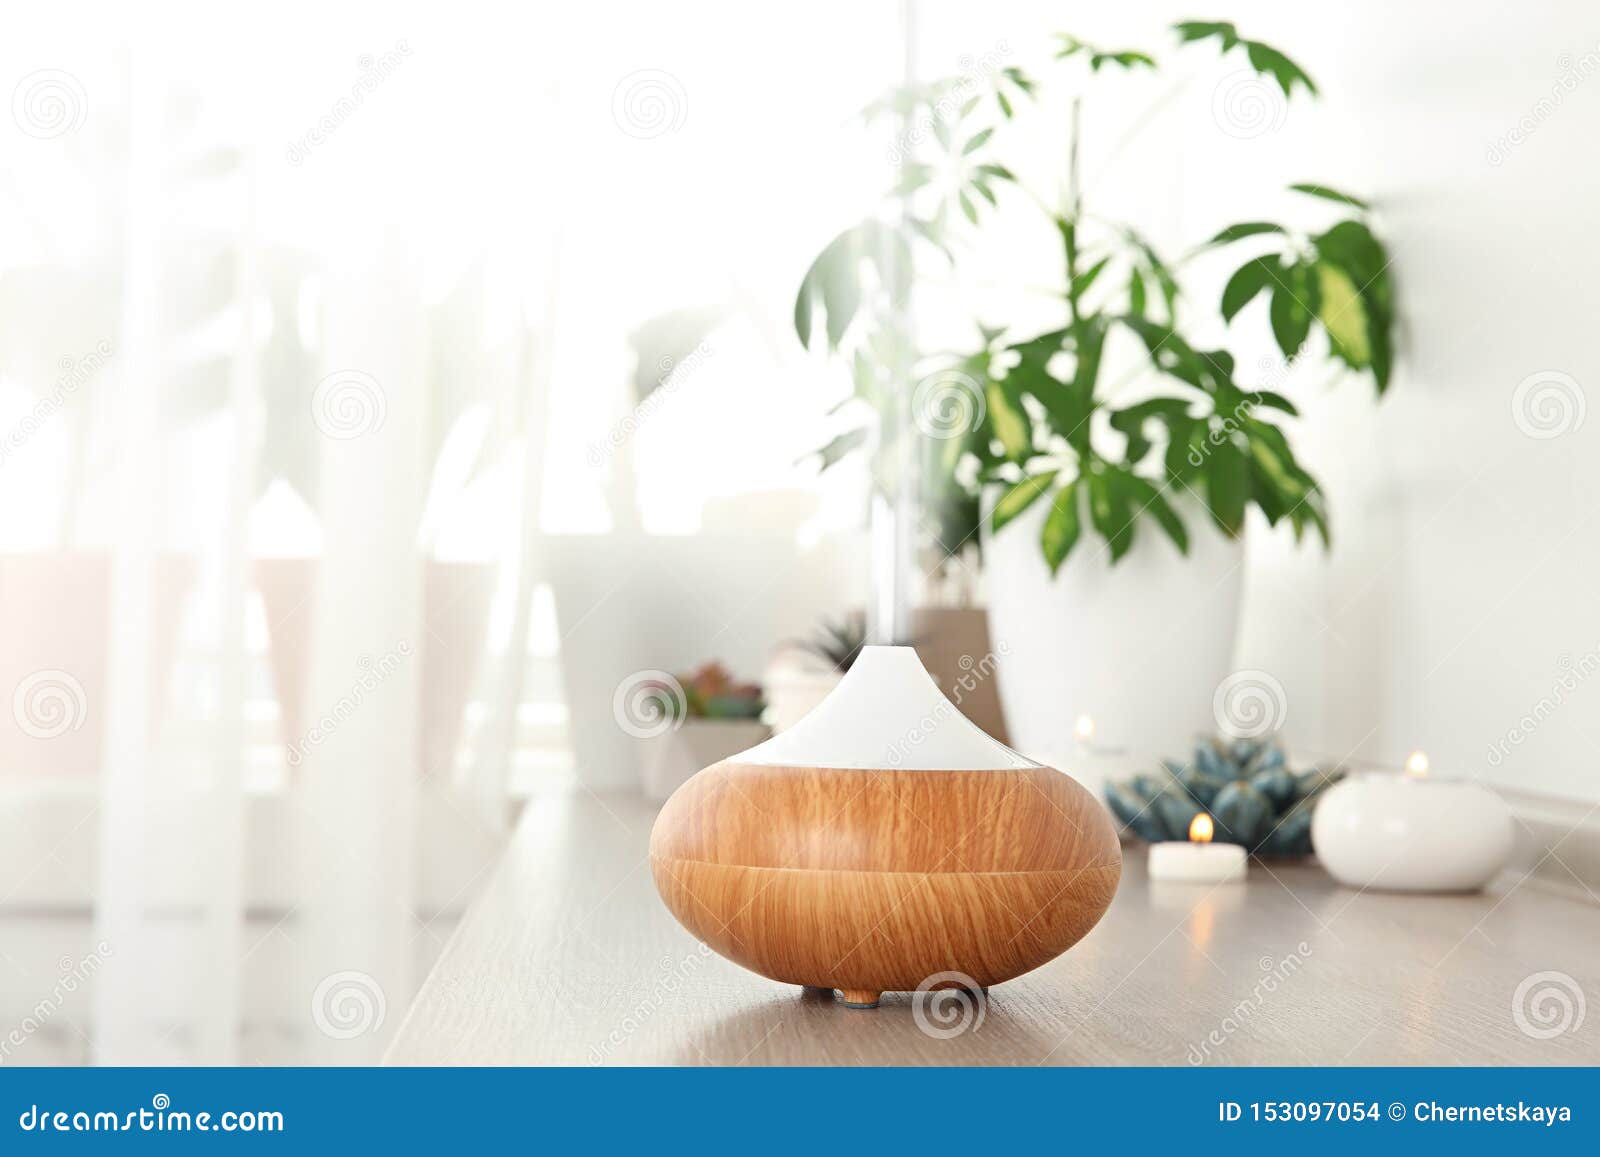 composition with modern essential oil diffuser on wooden shelf indoors